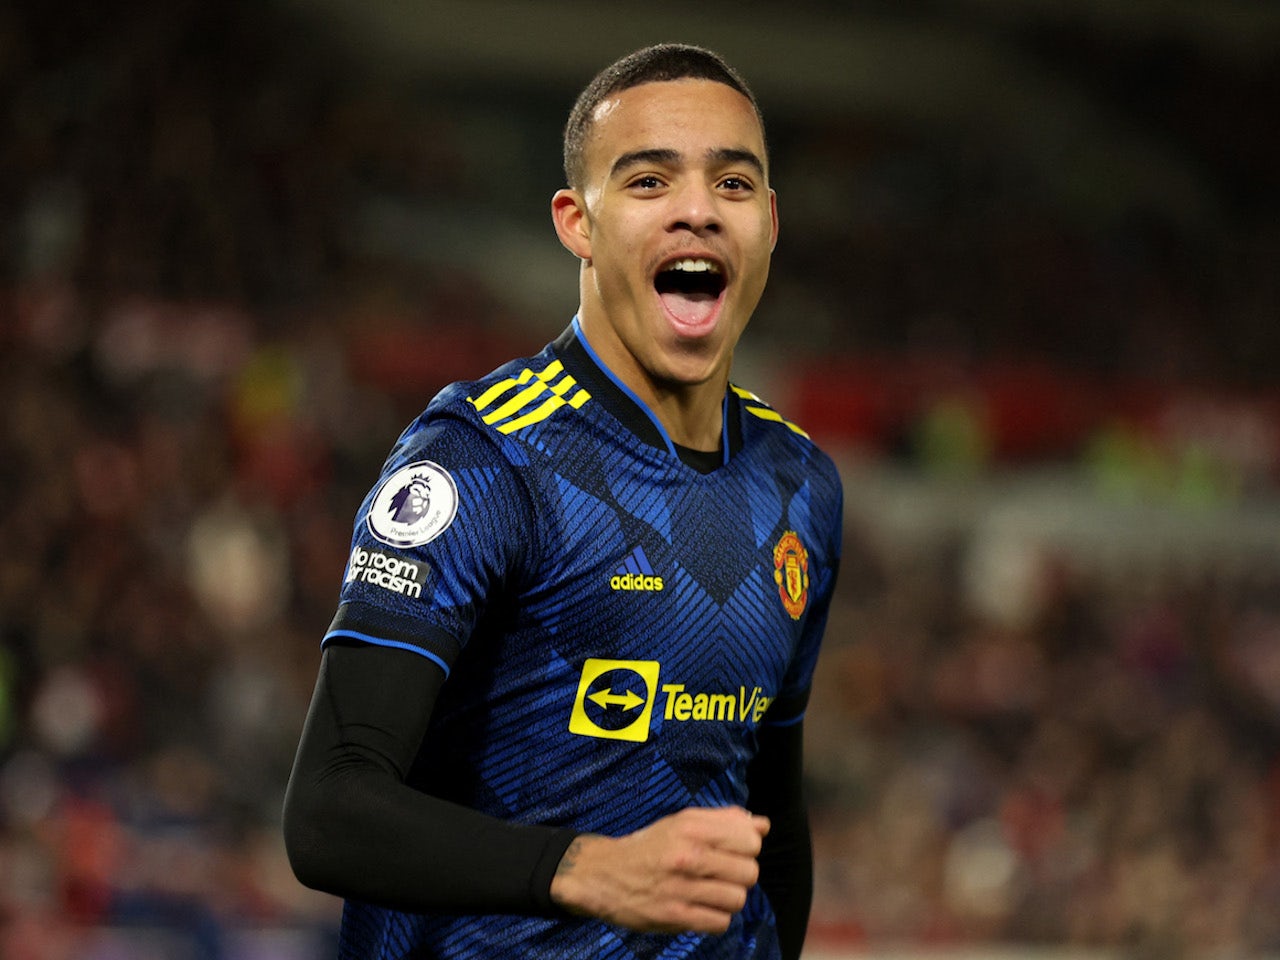 Sir Jim Ratcliffe provides update on Mason Greenwood situation after arrival